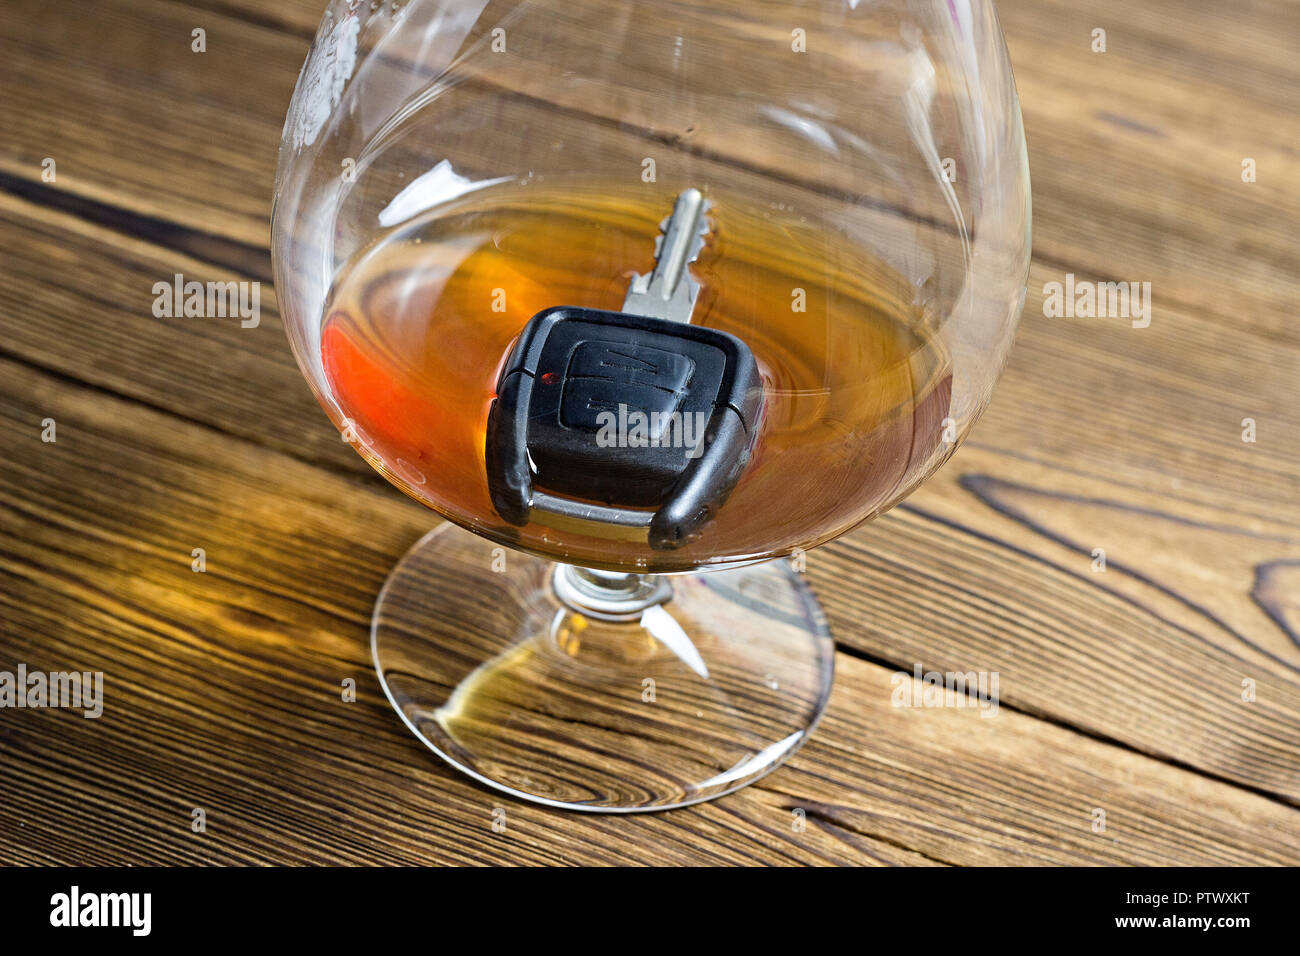 Car key in a glass with alcohol, wooden background, close-up Stock Photo